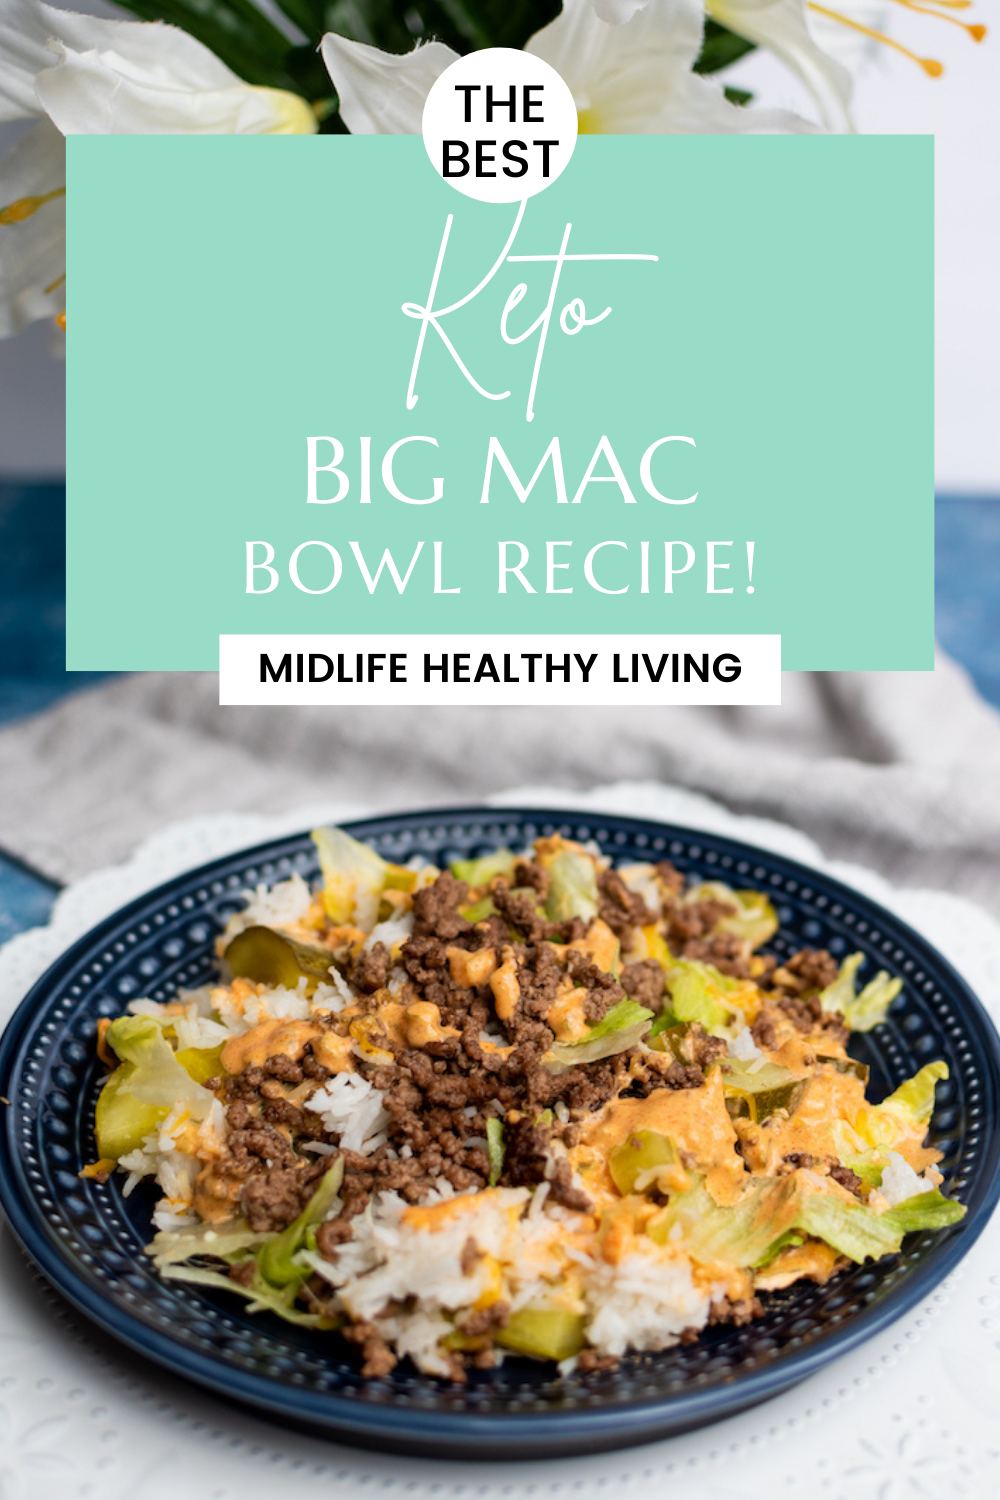 pin showing the finished Big Mac bowl recipe ready to serve.